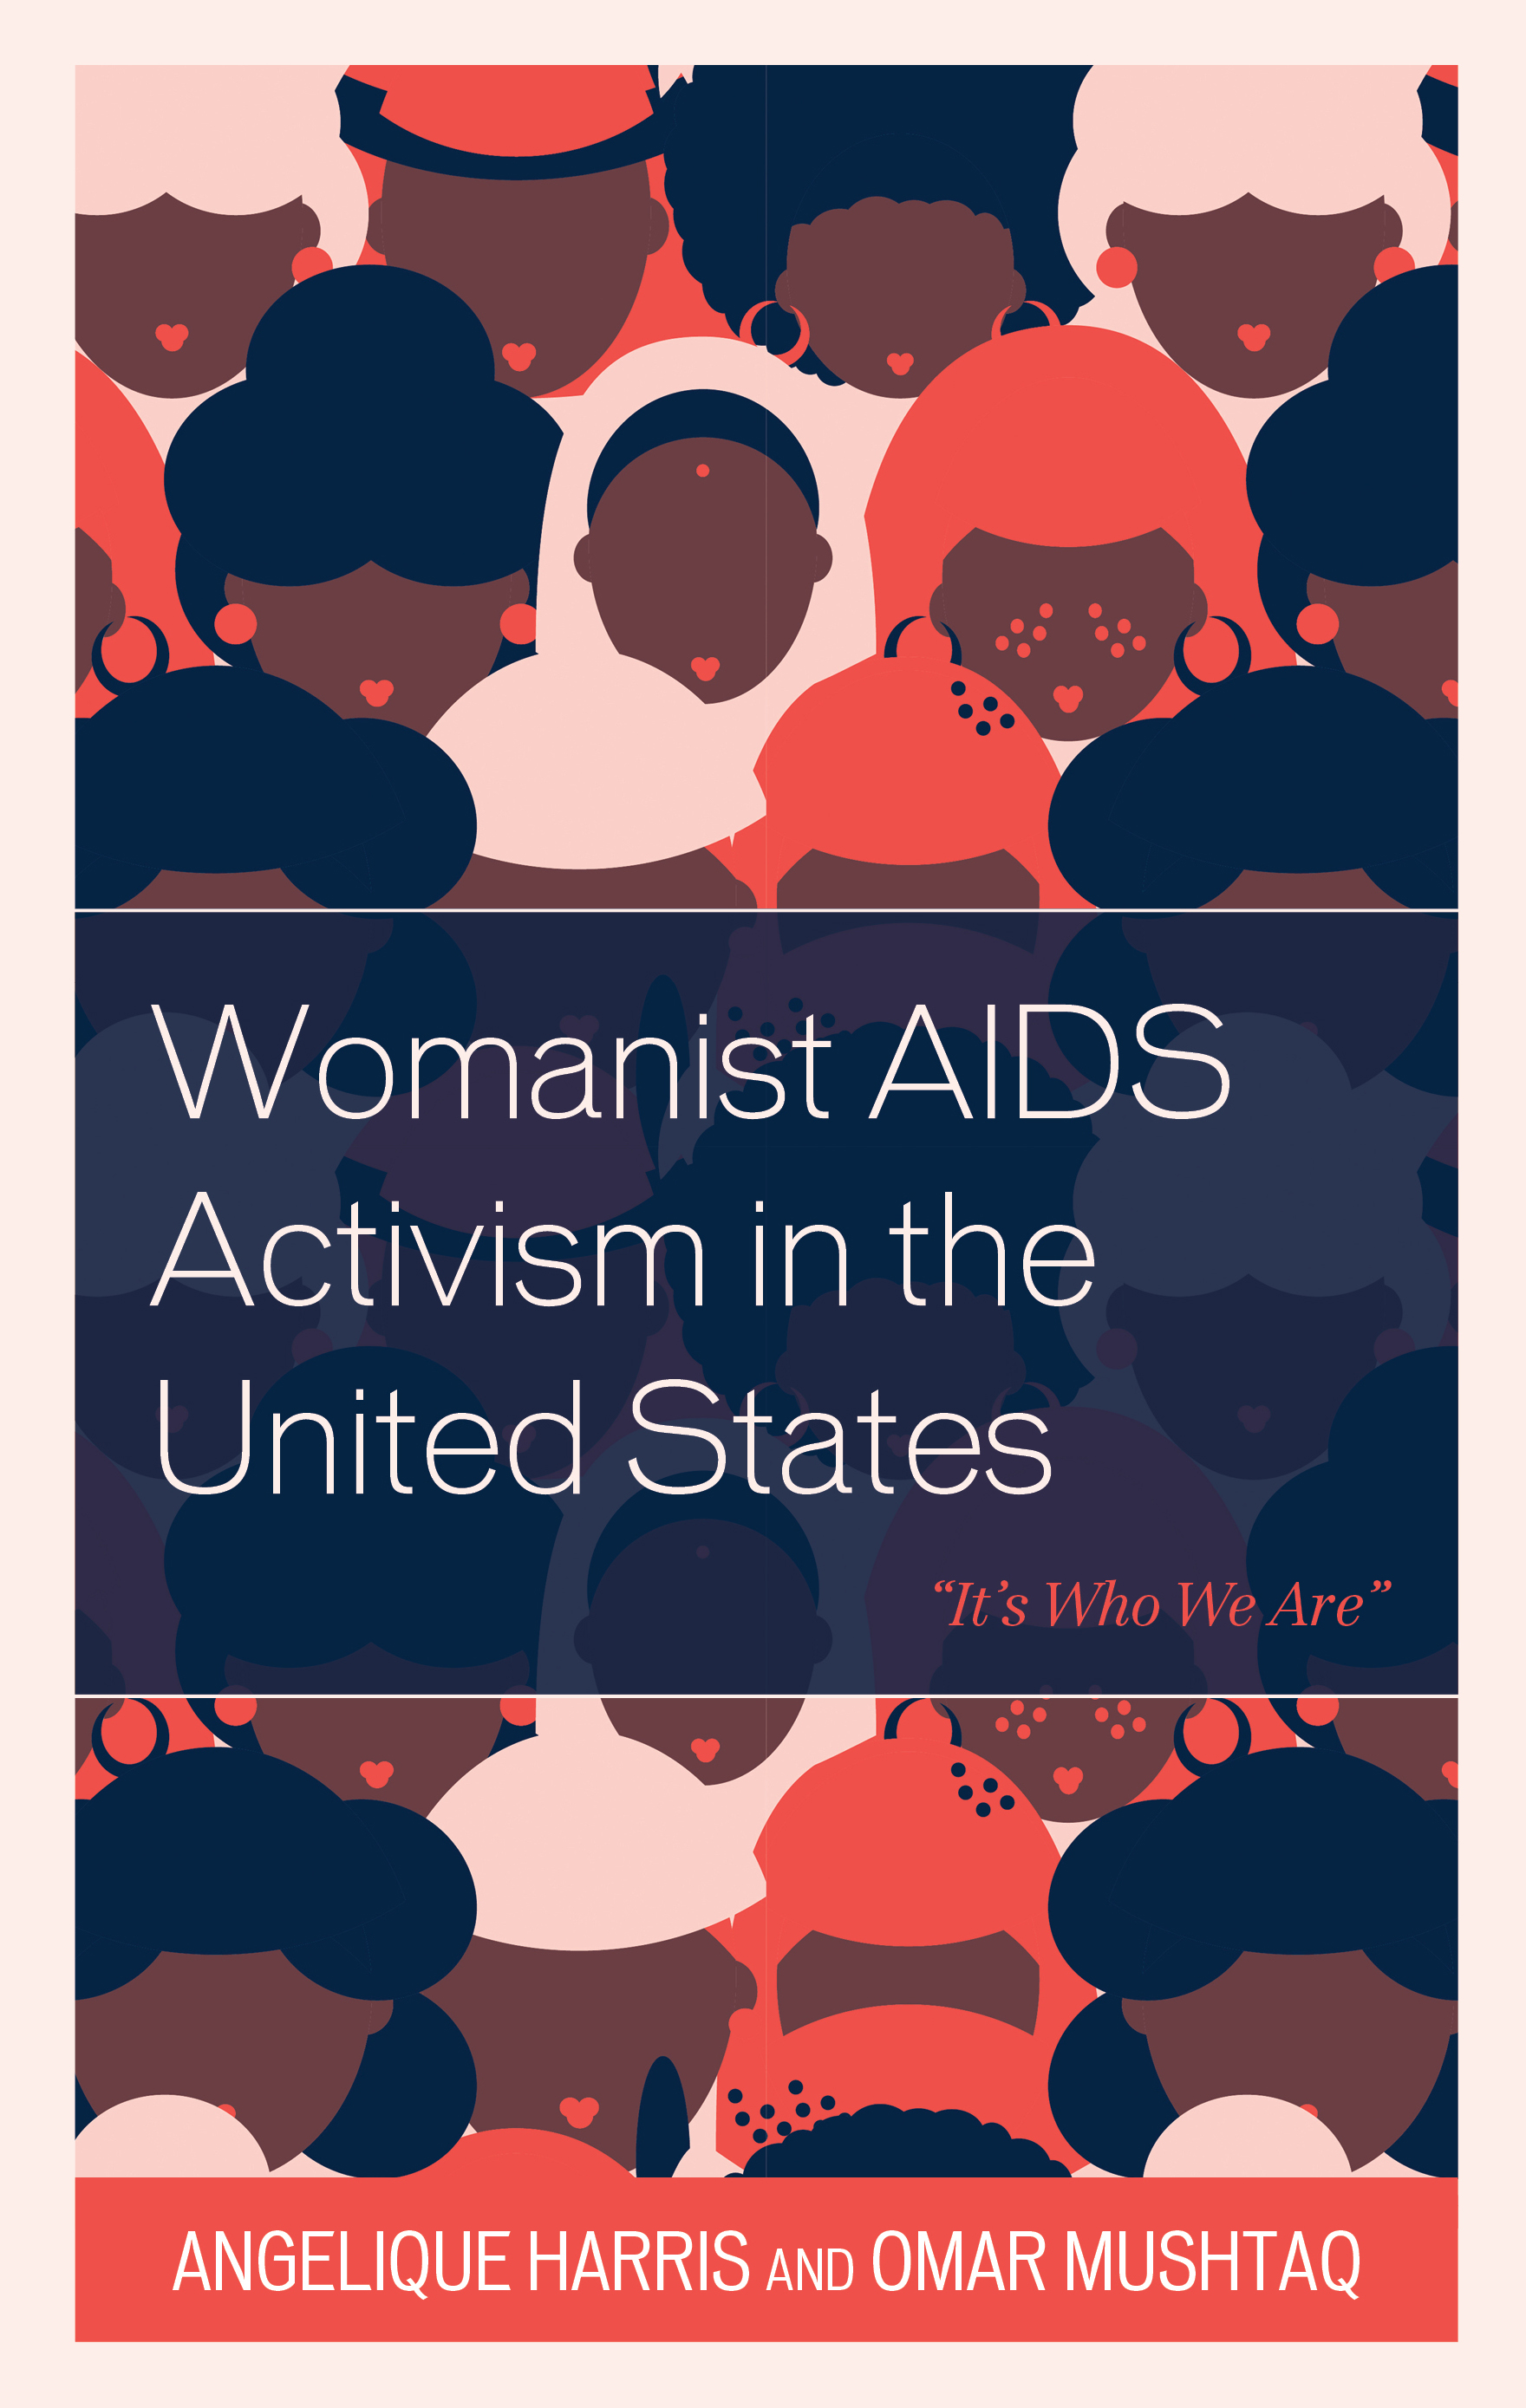 Womanist AIDS Activism in the United States: “It’s Who We Are”